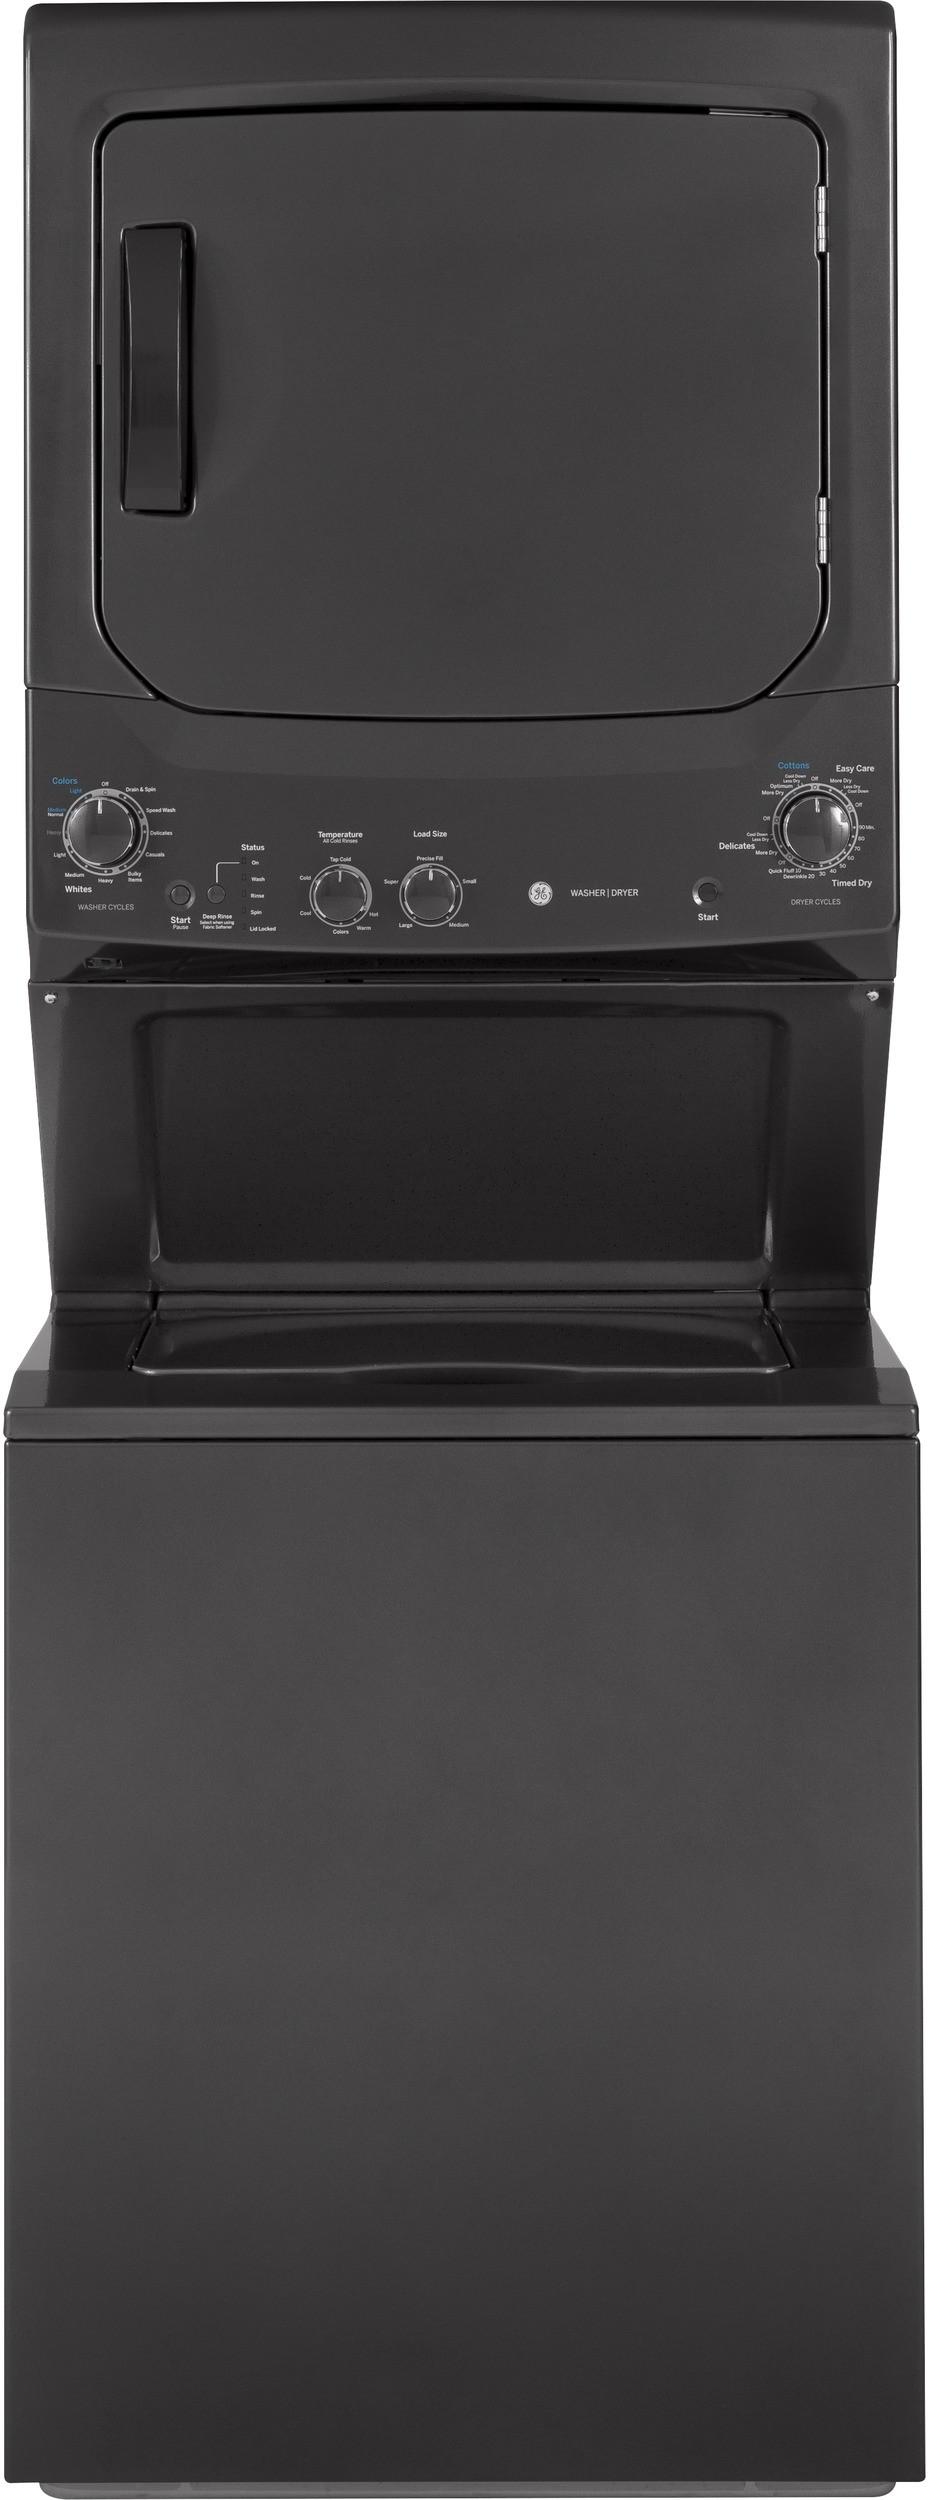 GE GUD27GSPMDG 27" Gas Combination 3.9 cu.ft. Washer and 5.9 cu.ft. Dryer in Diamond Gray